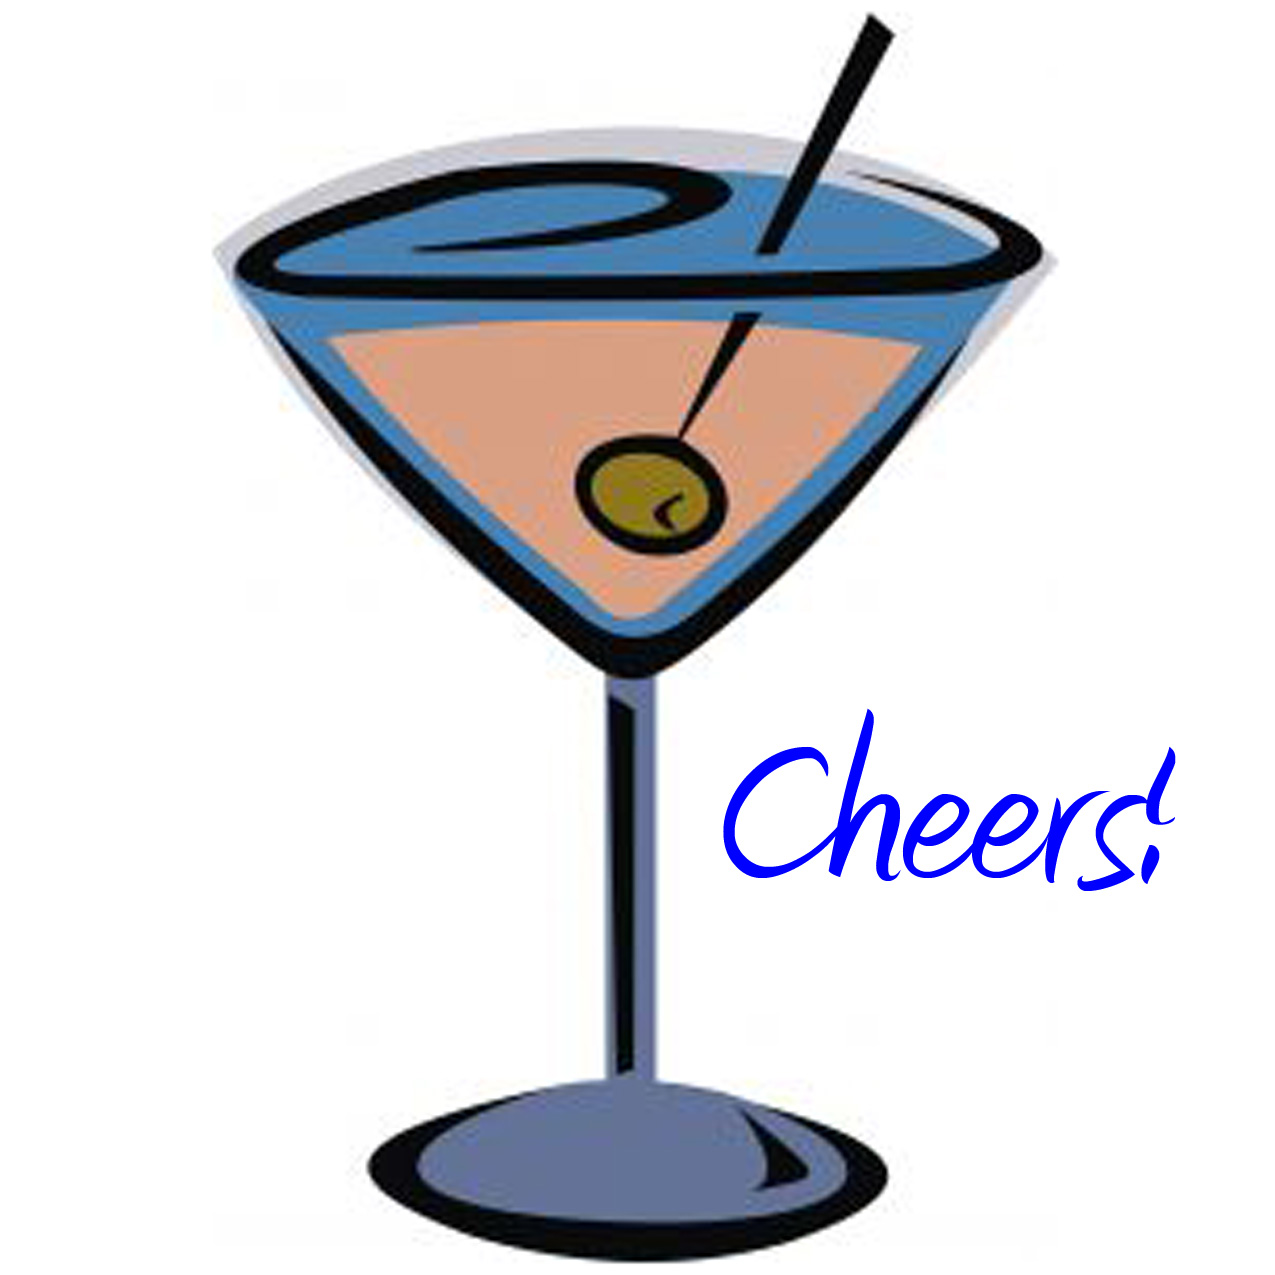 Martini Drawing - ClipArt Best